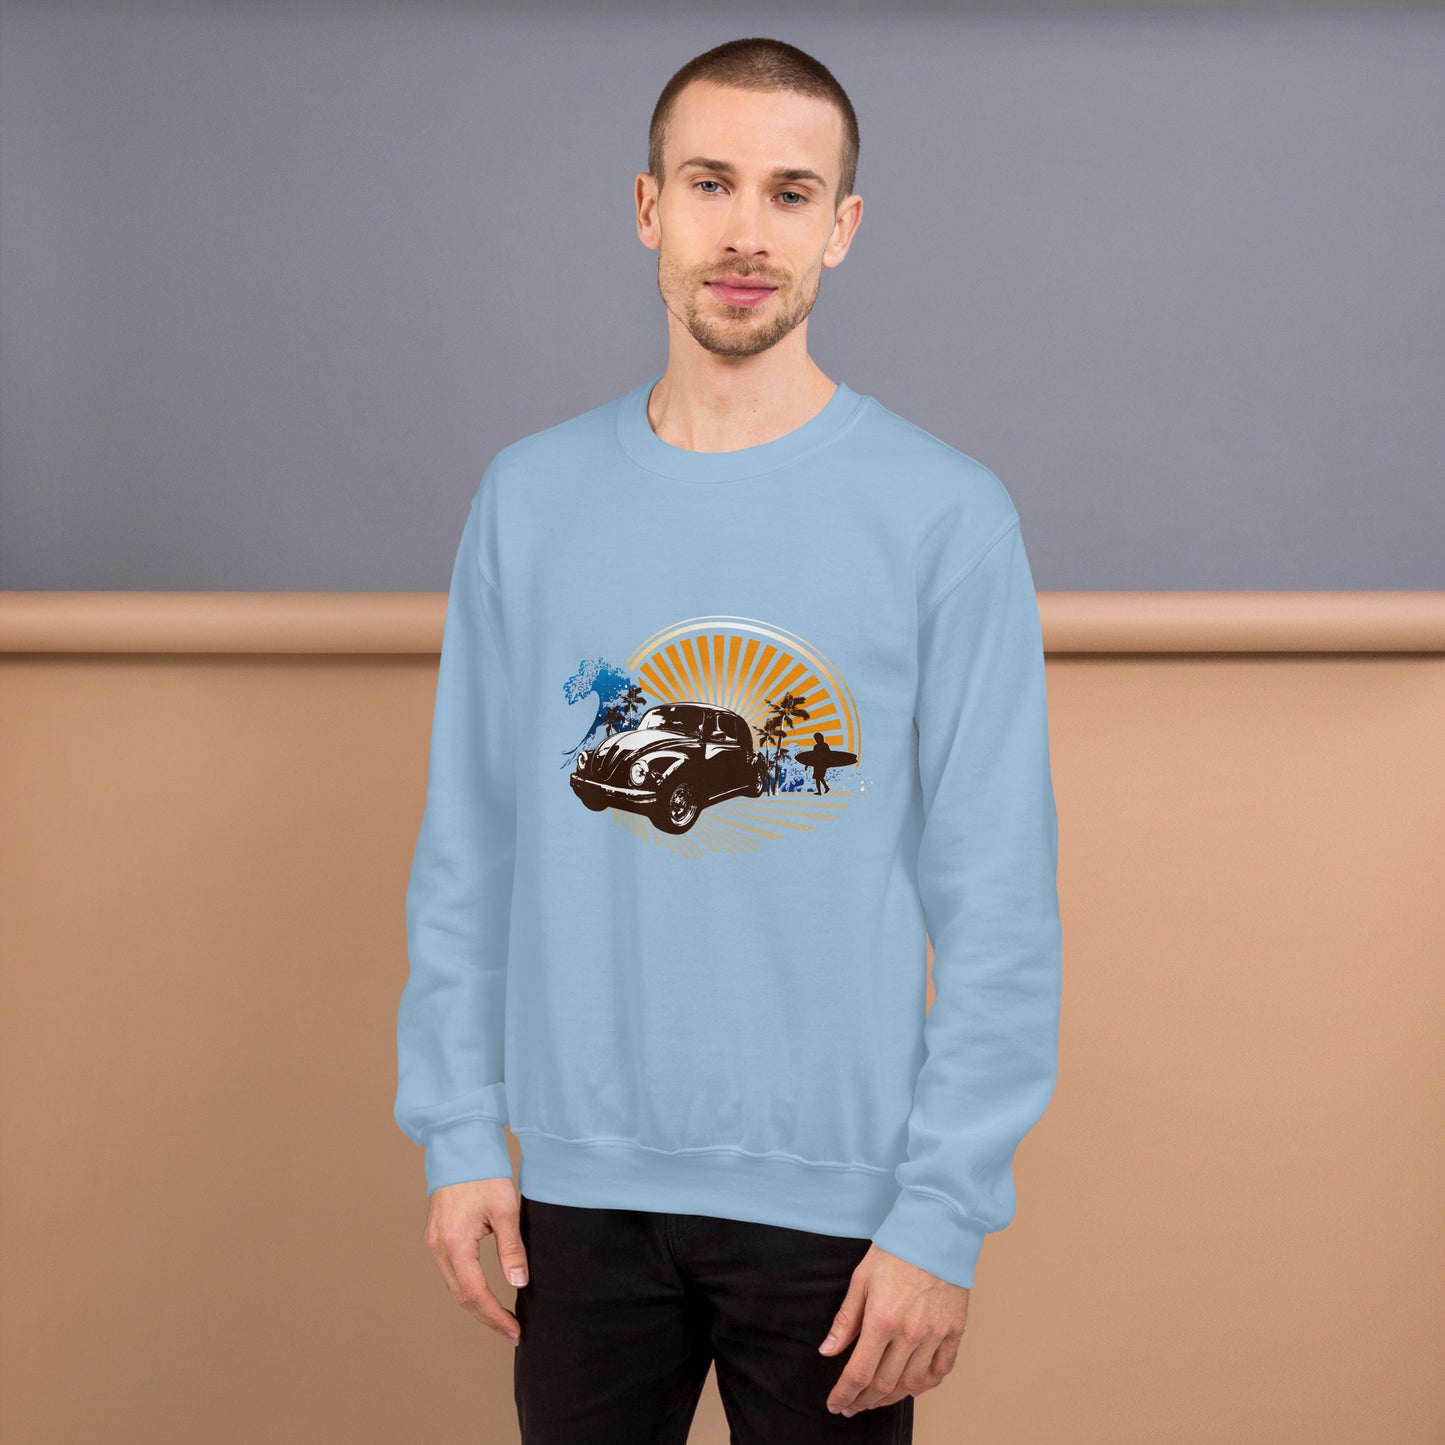 Men with light blue sweatshirt with sunset and beetle car